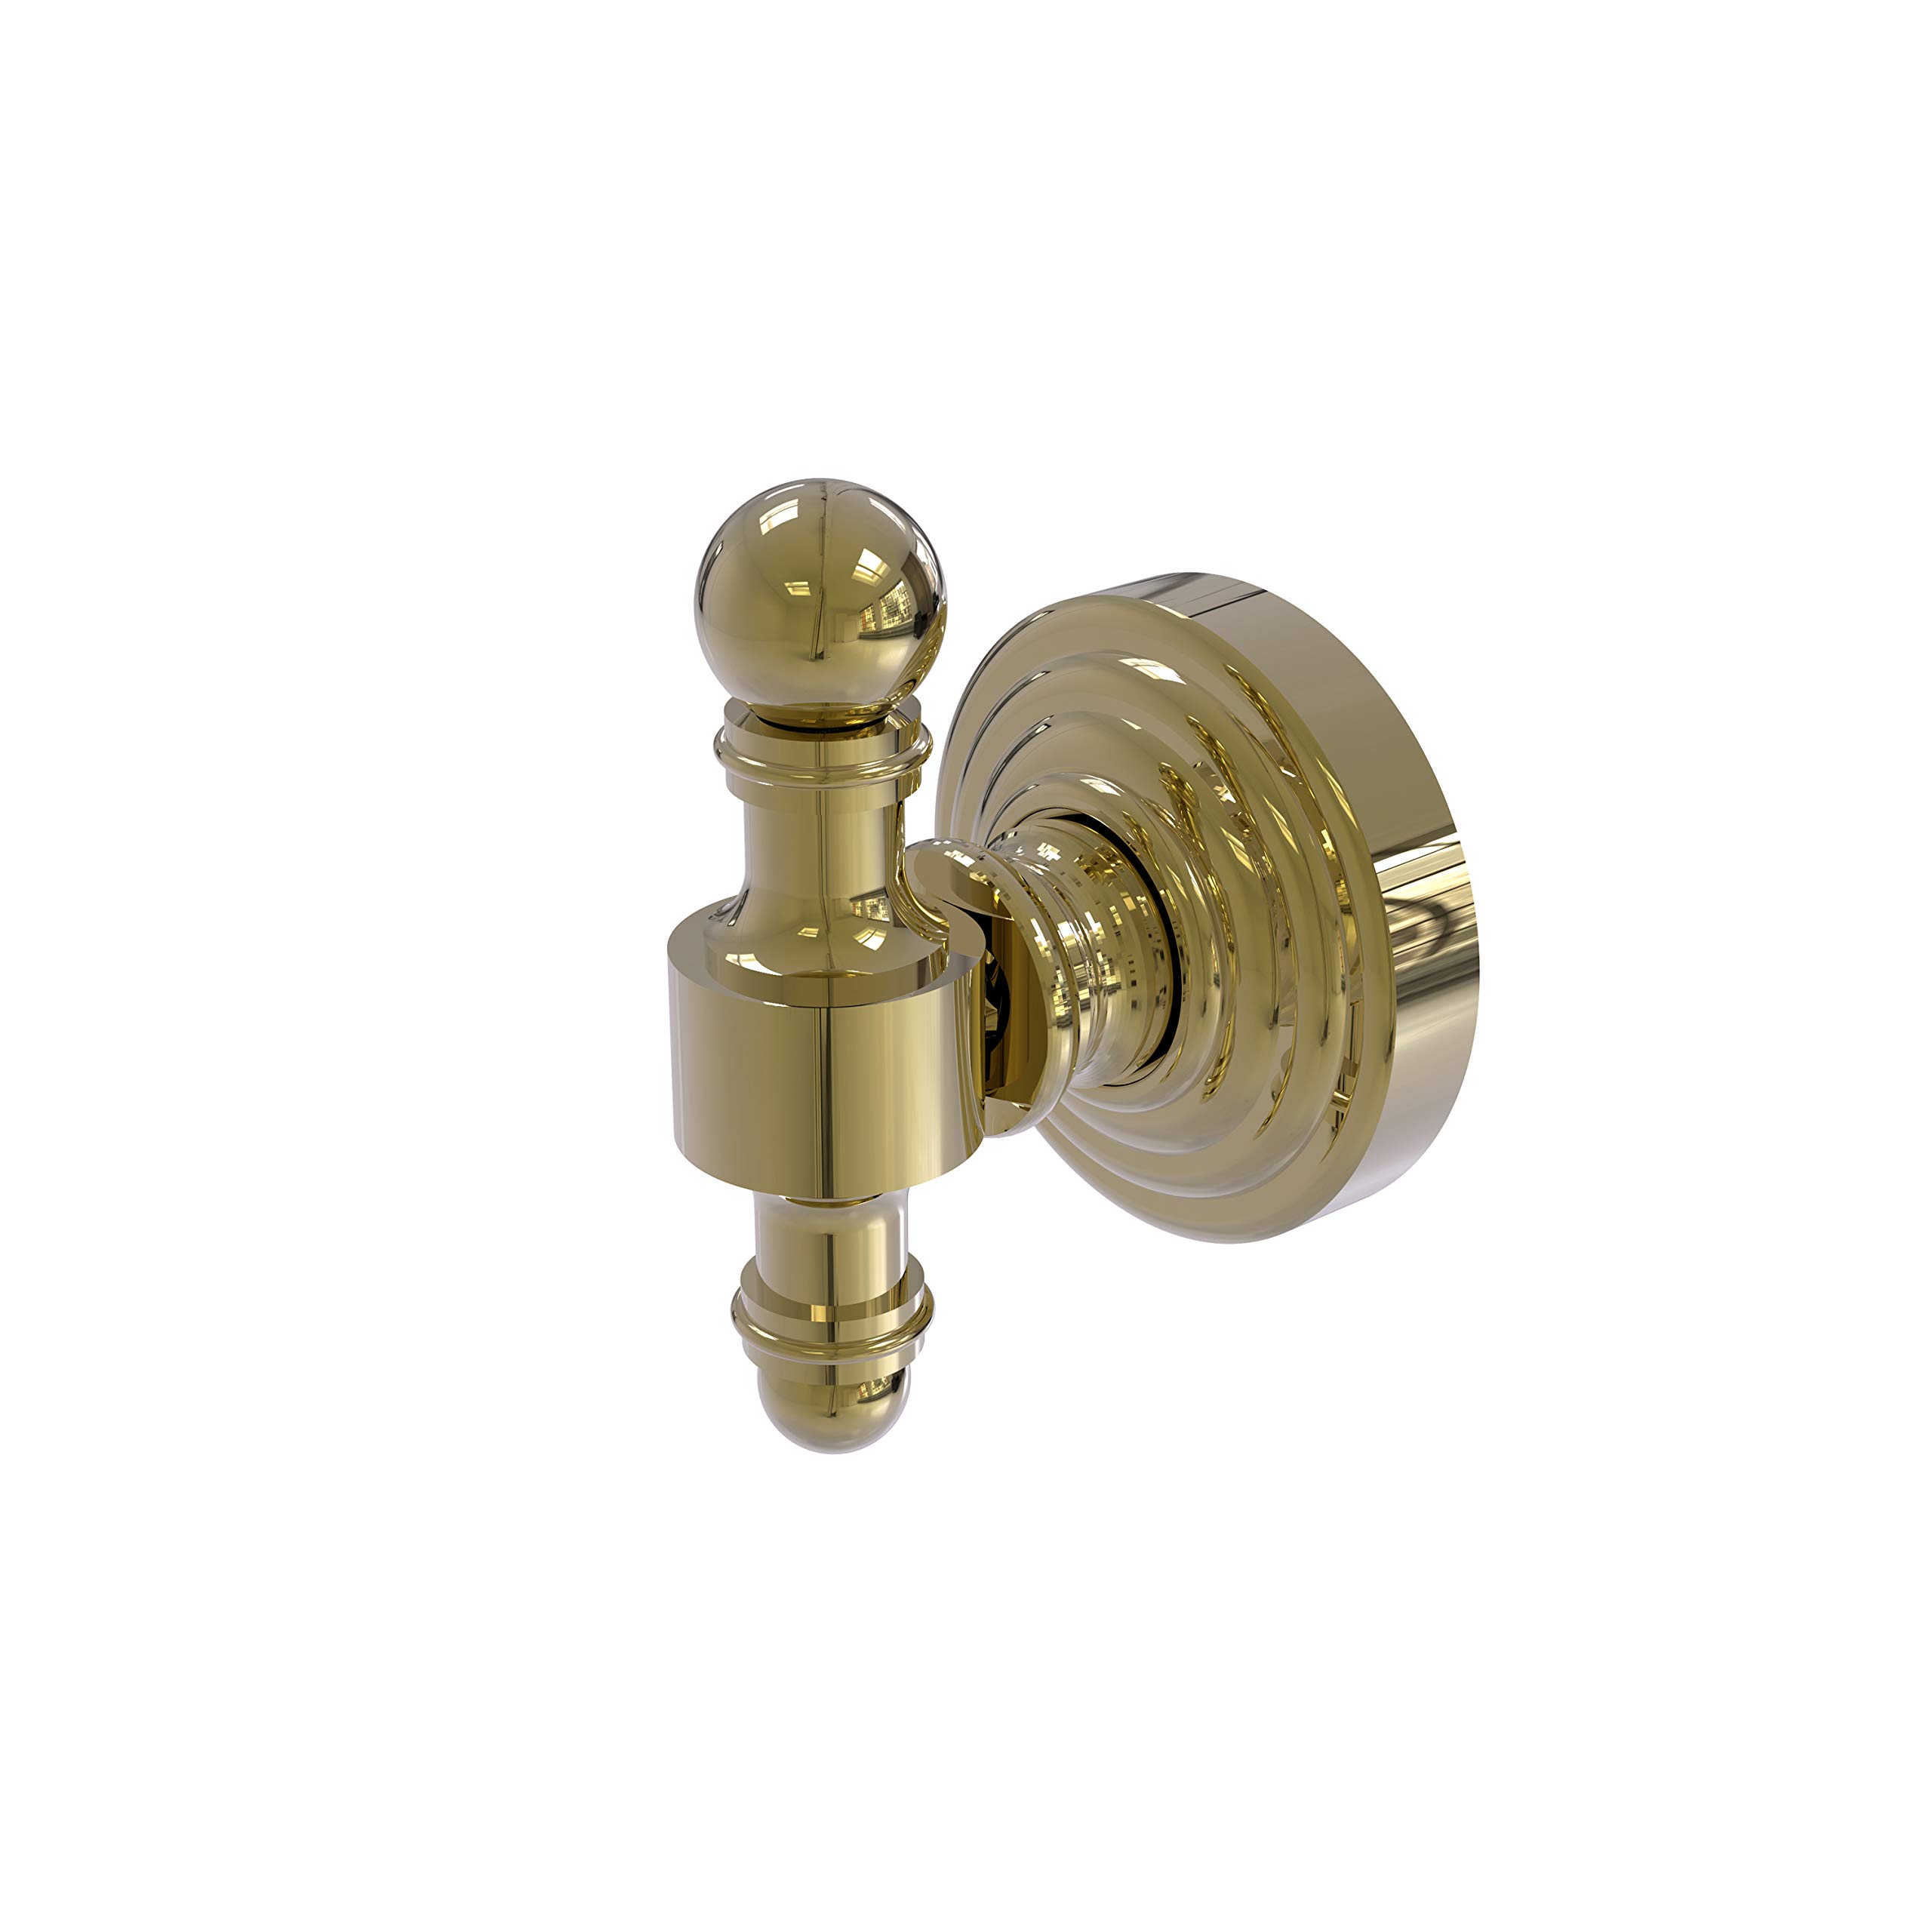 Allied Brass RW-20 Retro Wave Collection Robe Hook, Unlacquered Brass